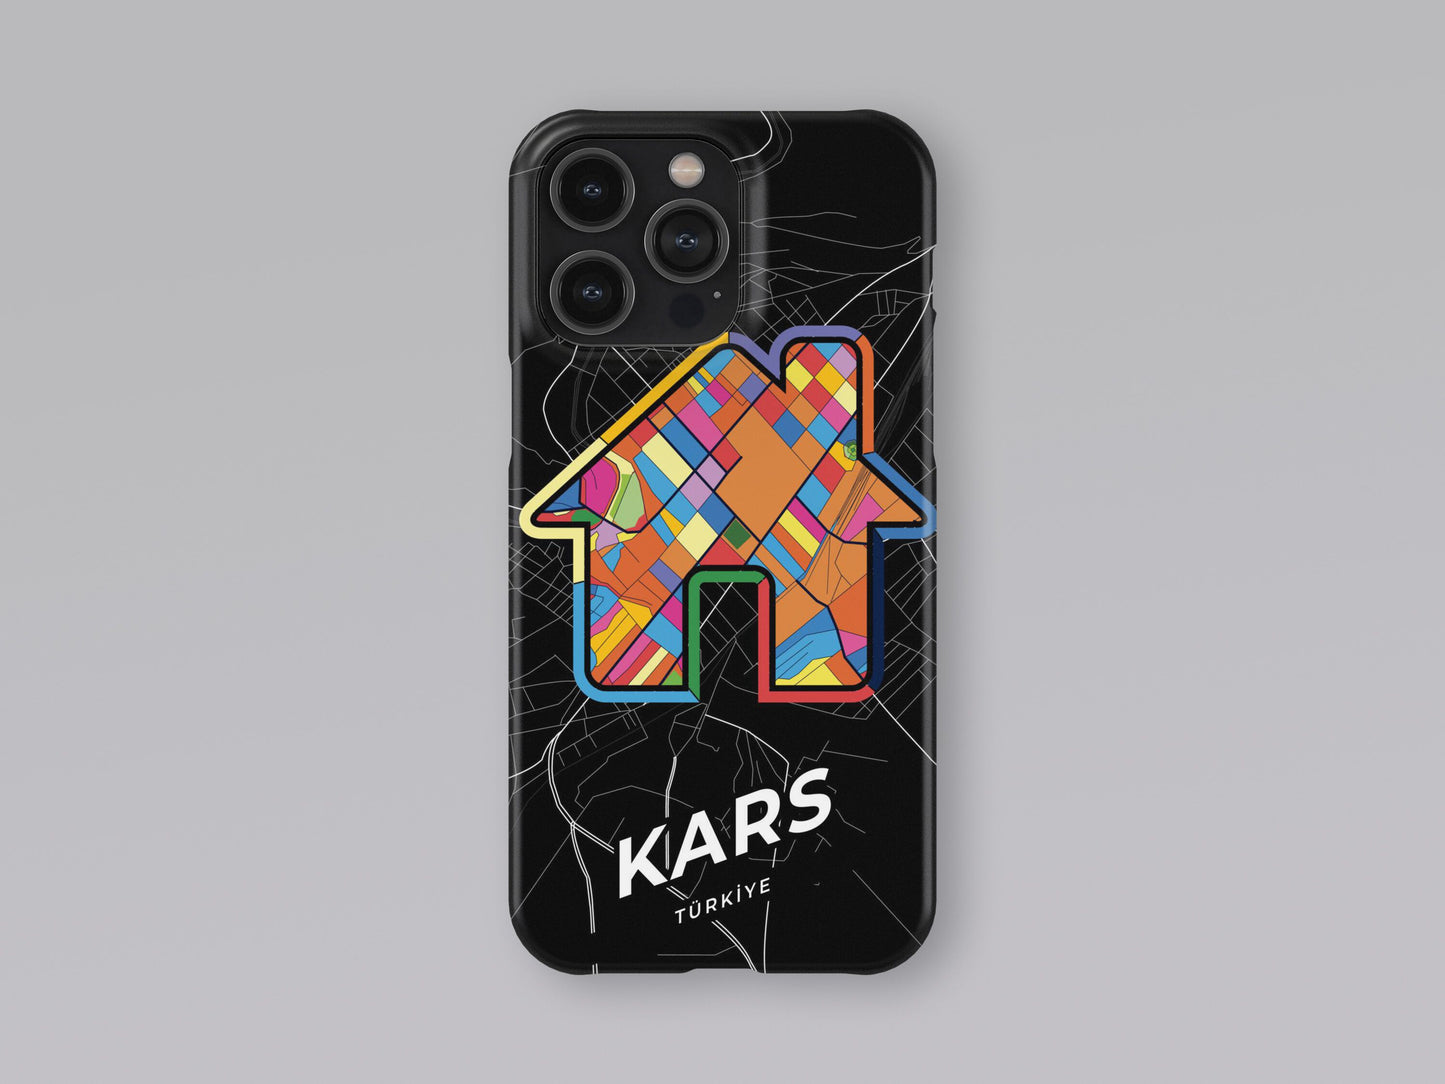 Kars Turkey slim phone case with colorful icon. Birthday, wedding or housewarming gift. Couple match cases. 3